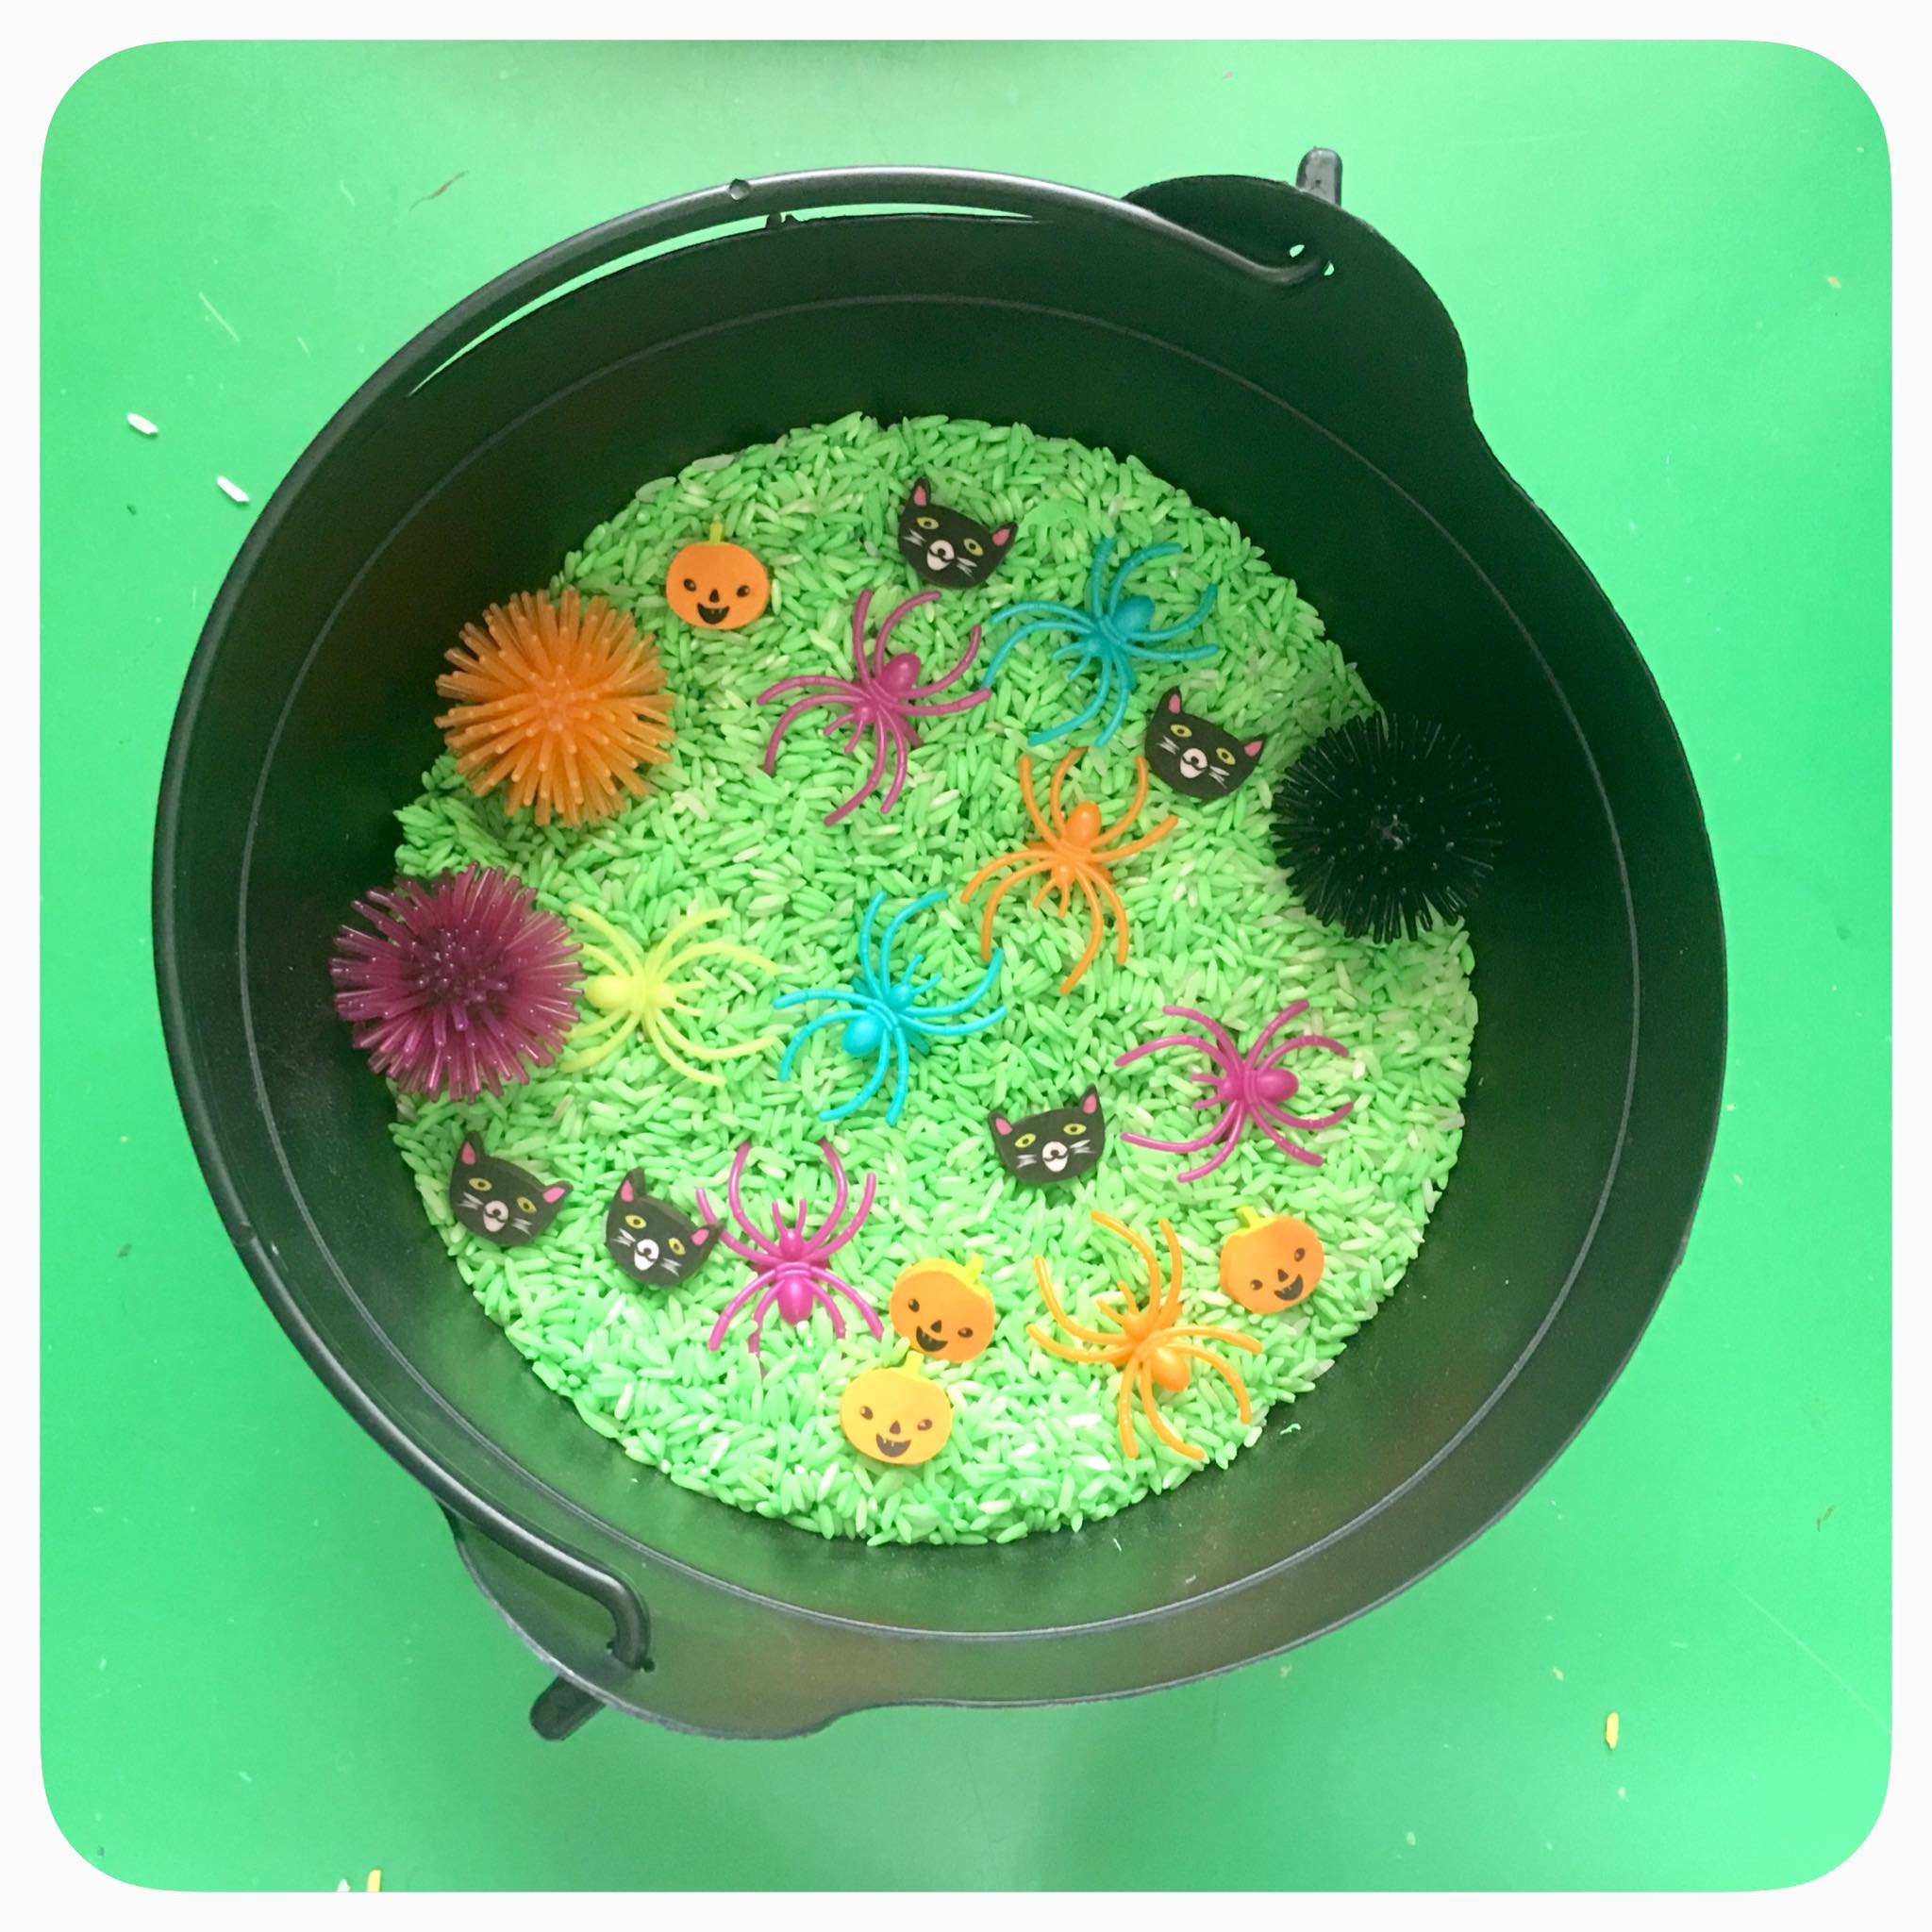 Halloween Cauldron sensory bin: created with non-toxic tempra paint and white rice. Add some fun and brightly colored spooky items and you've got yourself a fun halloween cauldron bin for your kids to enjoy for days.